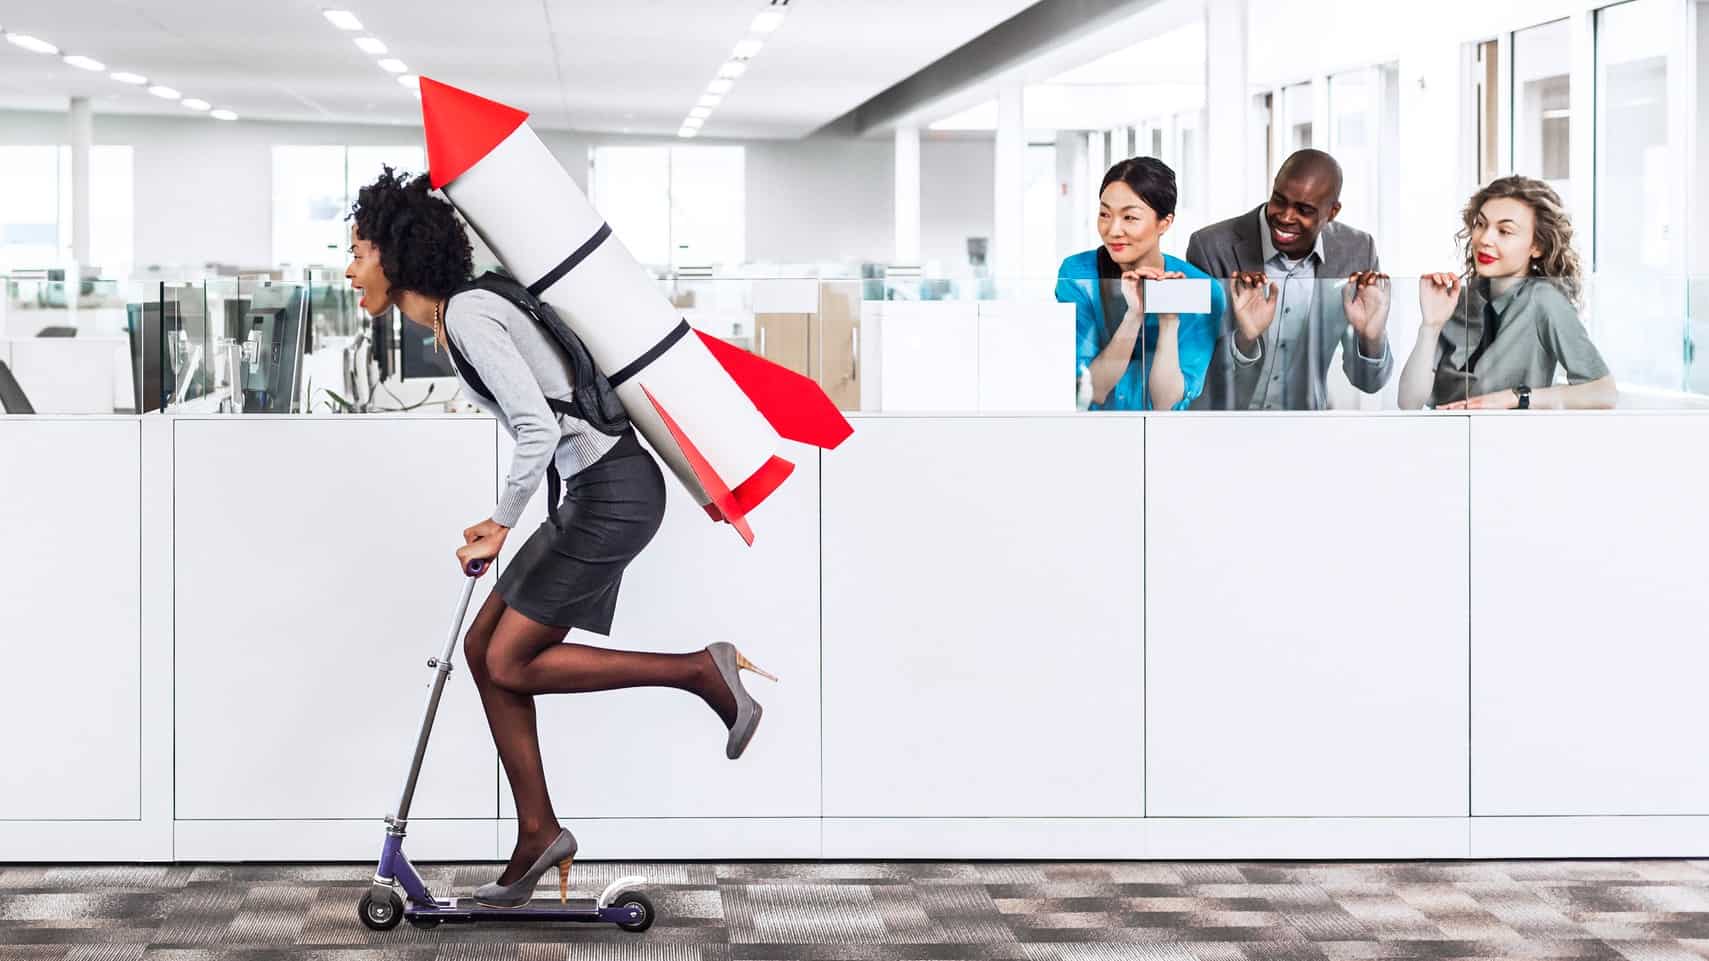 A woman rides through an office on a scooter with a rocket strapped to her back as colleagues cheer.